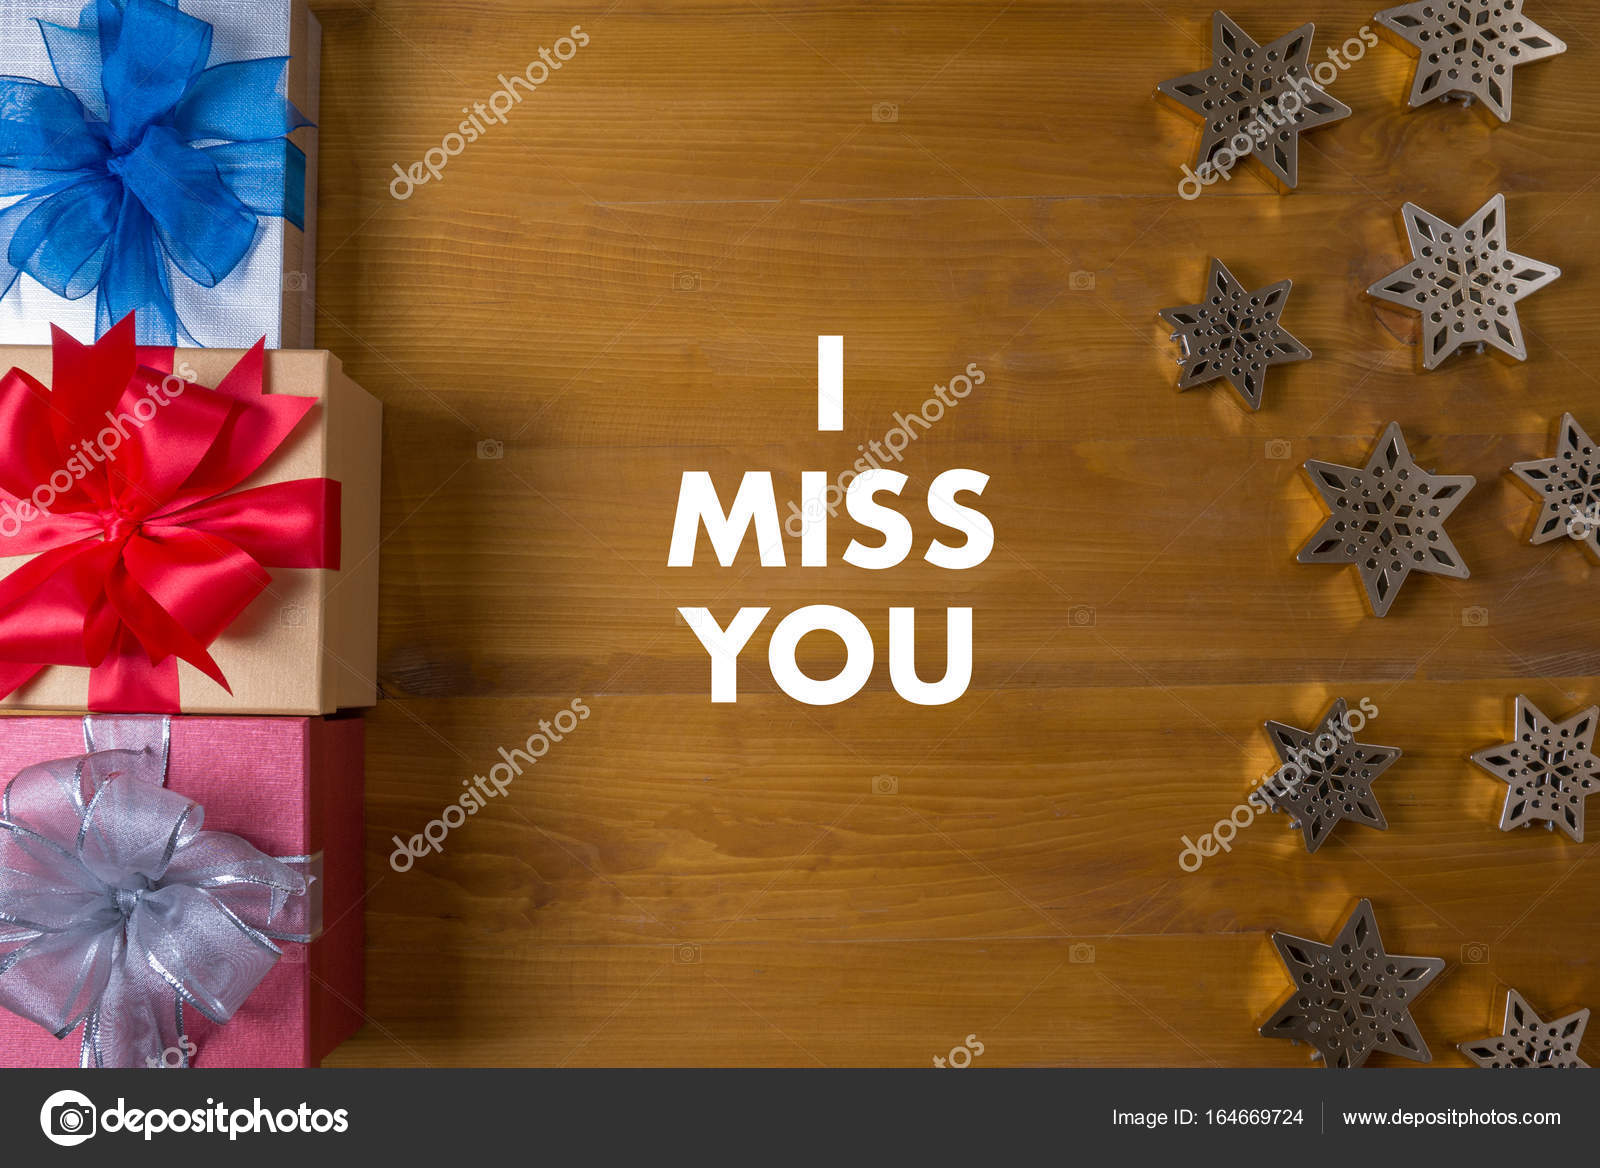 I MISS YOU I Love You too gift Happiness Care Passion Romance ...